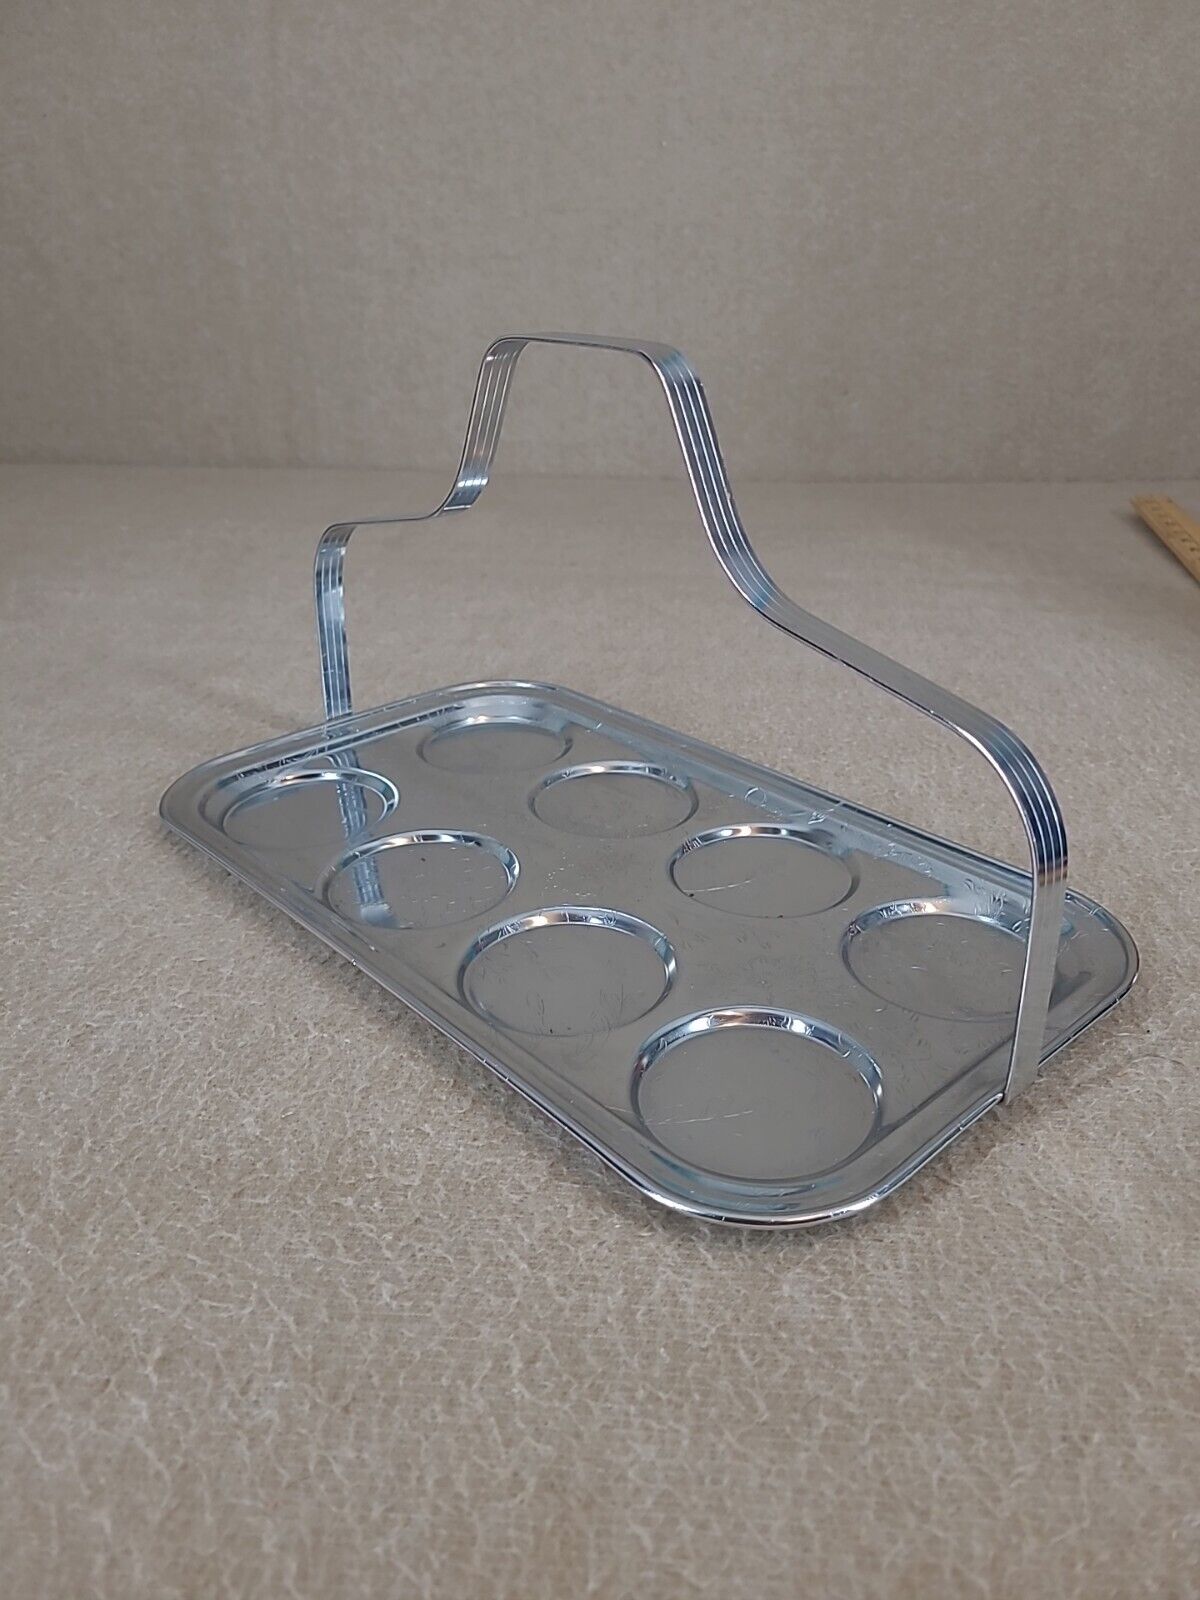 Vtg Deco Chrome Silver Tone Metal Caddy Cocktail Bar Drinking Glass Carrier MCM